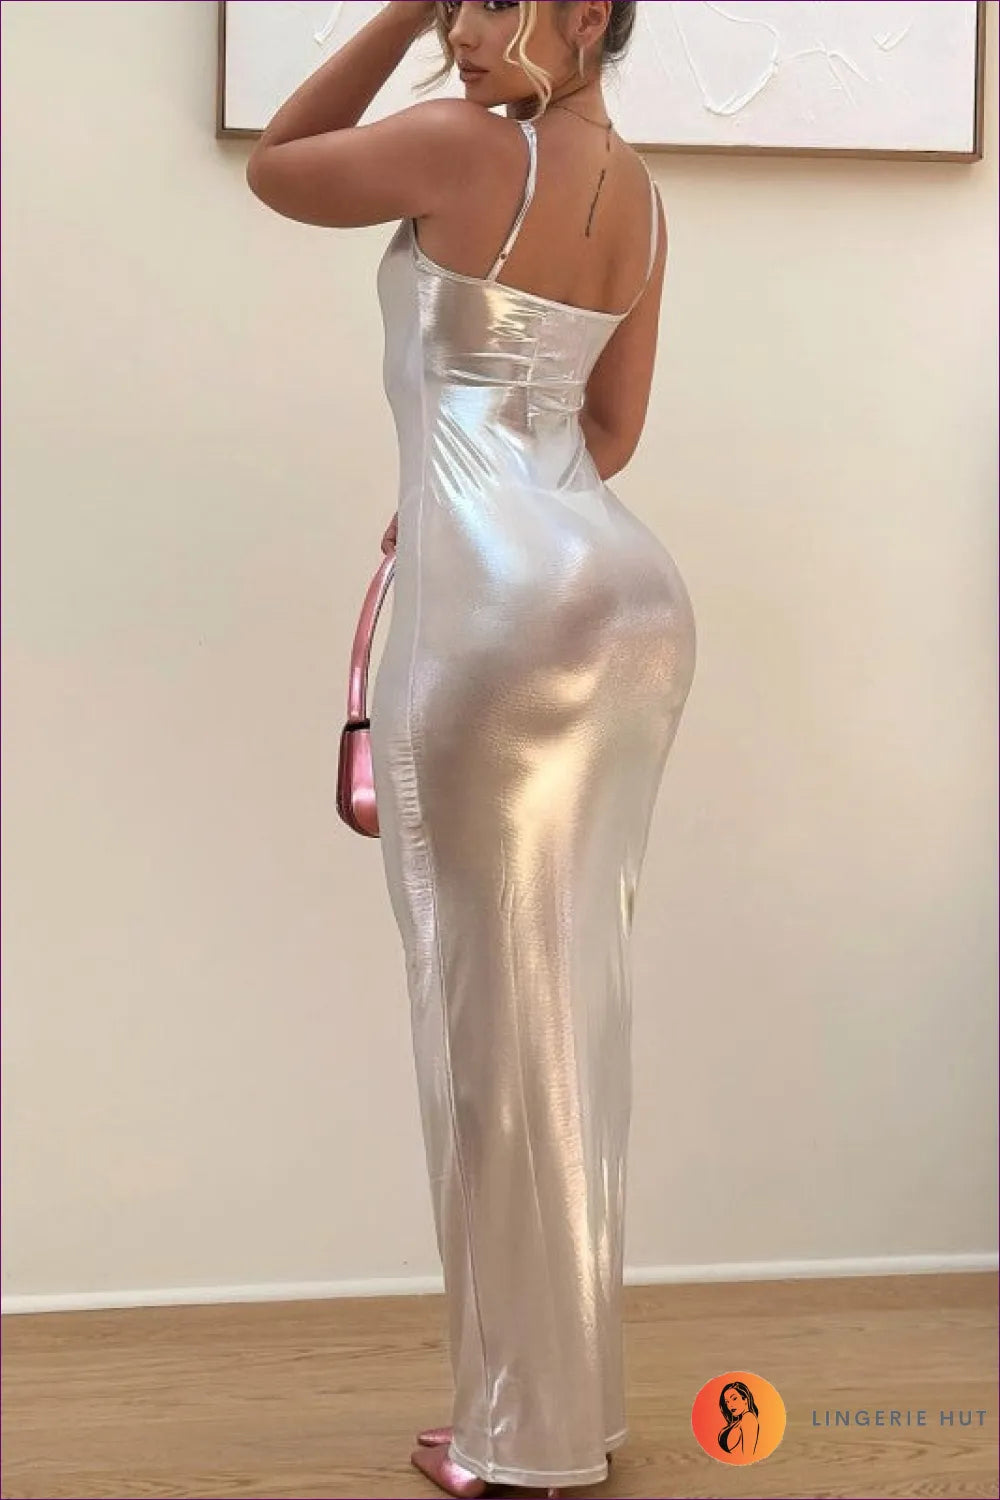 Turn Heads And Own The Night With Lingerie Hut’s Metallic Sleeveless Slim Fit Maxi Dress. Dazzle In Comfort